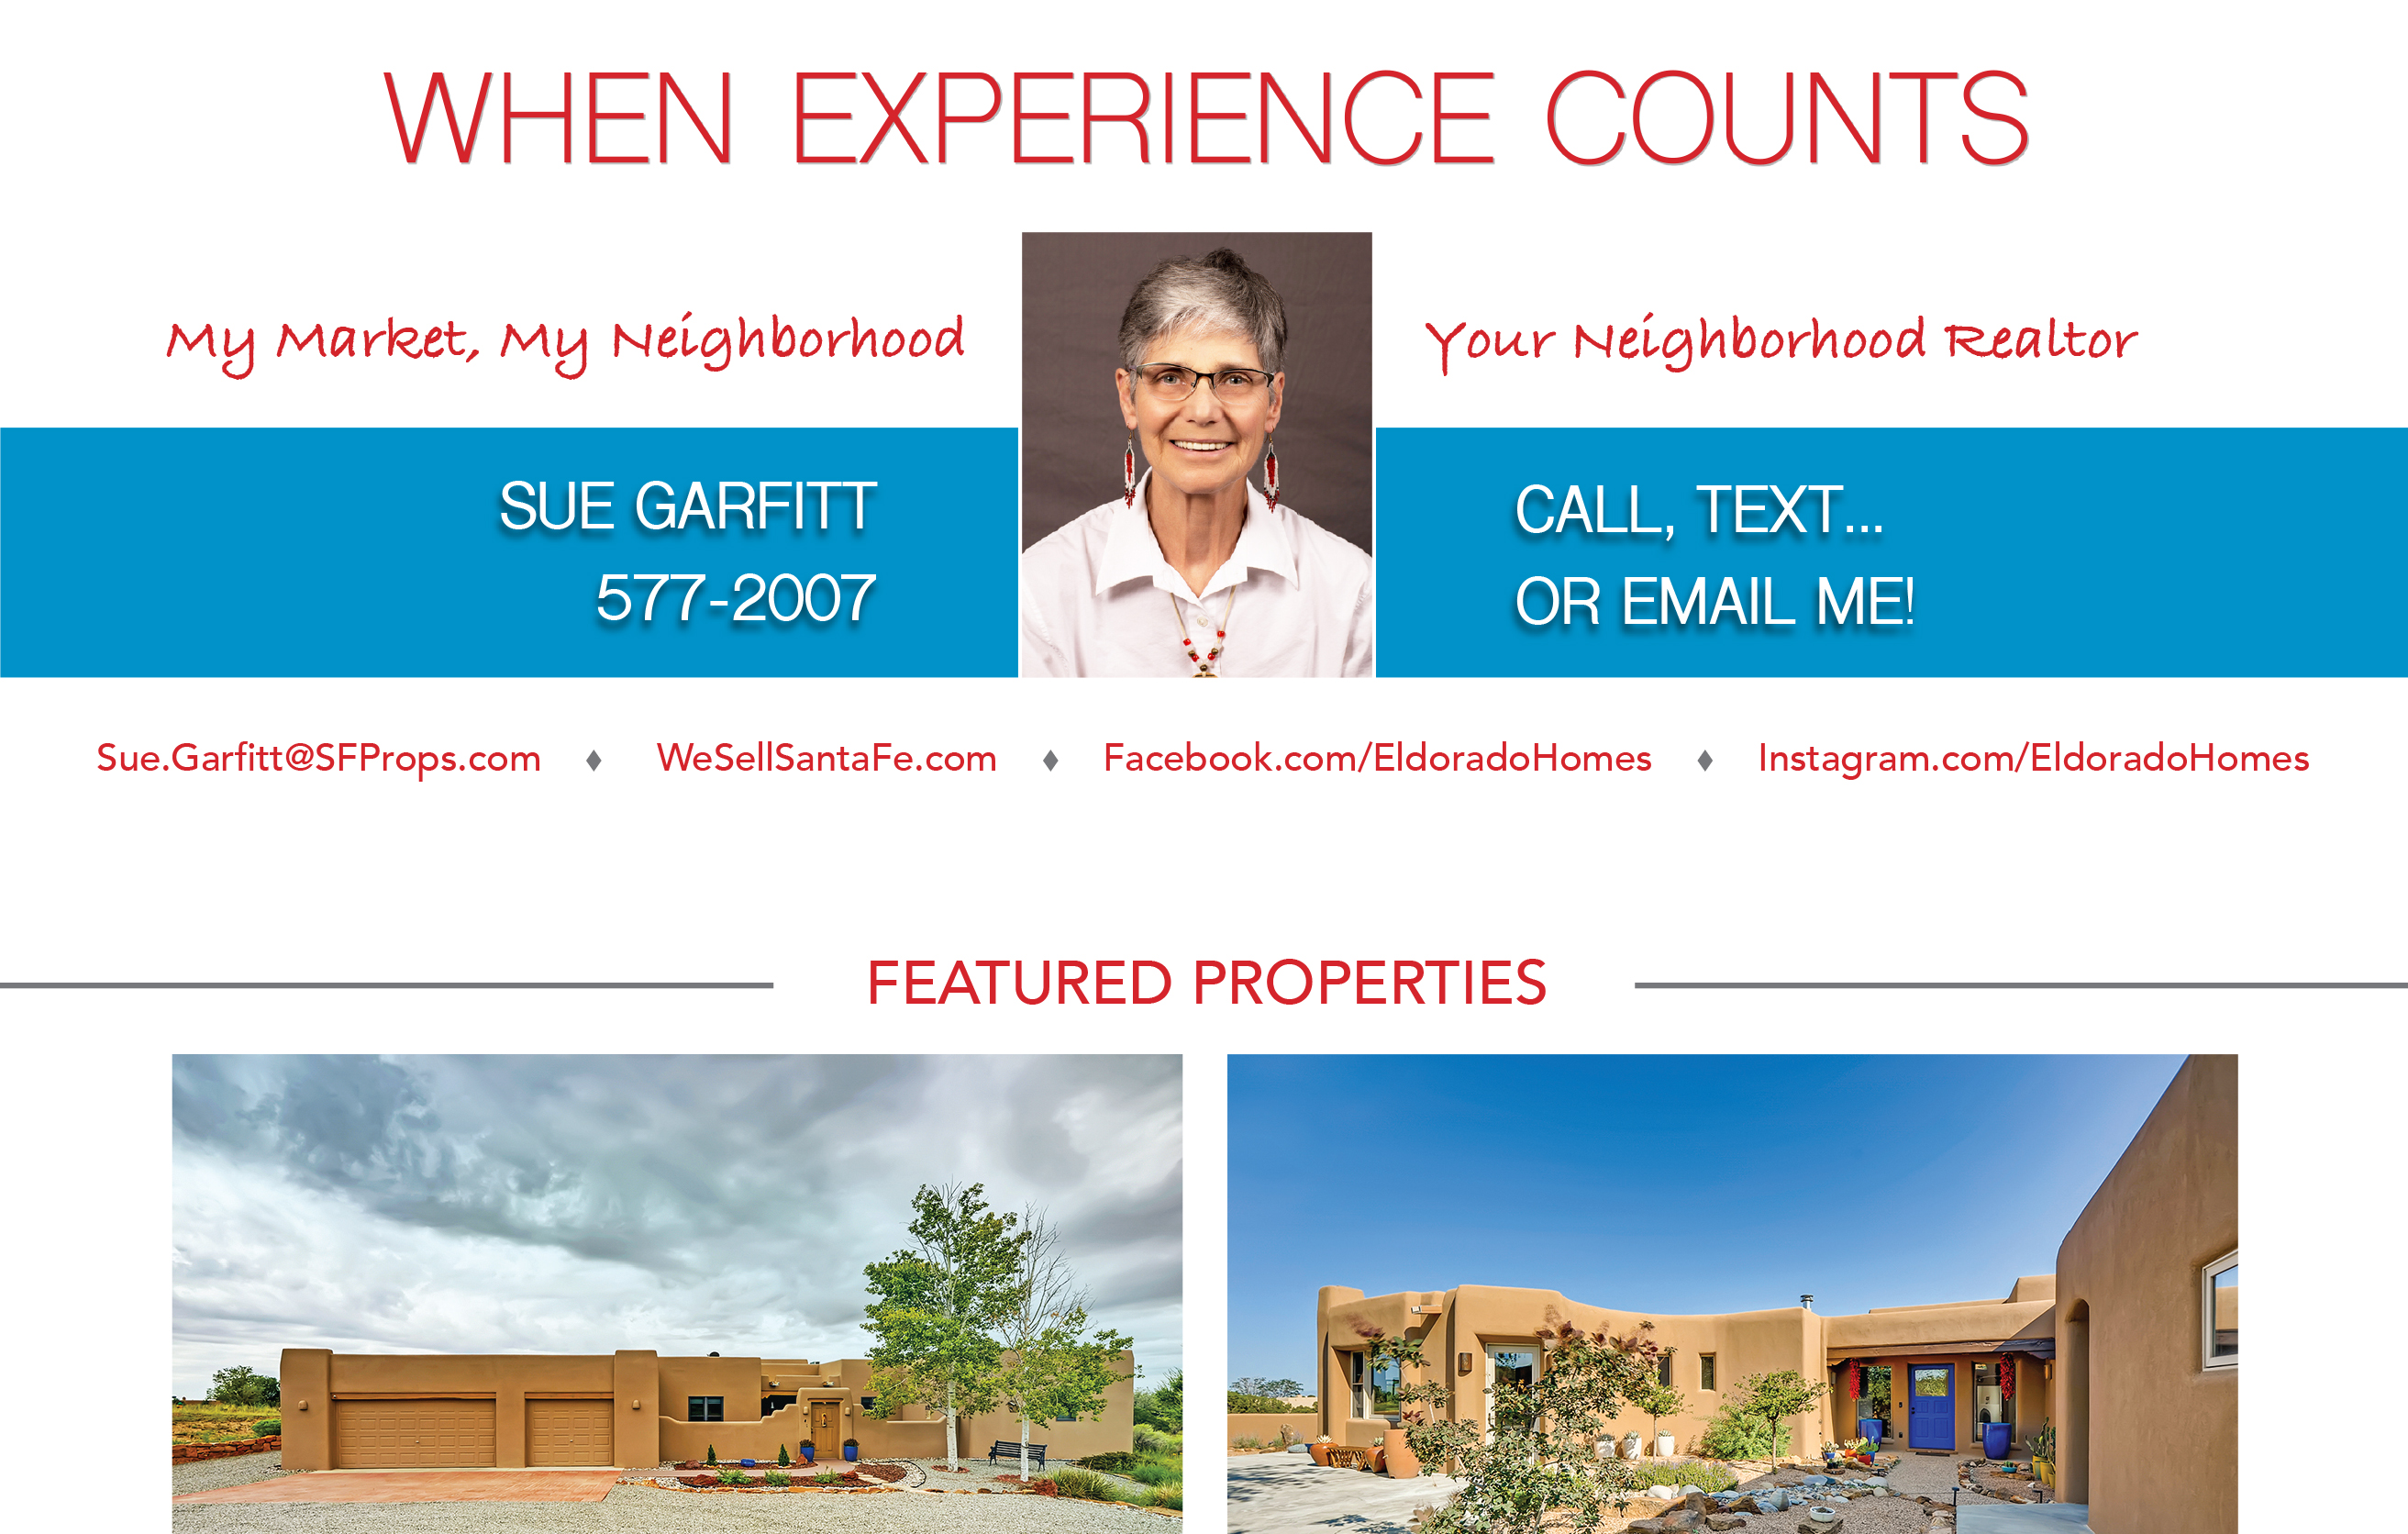 Did you see my ad in the October issue of Eldorado Living? 